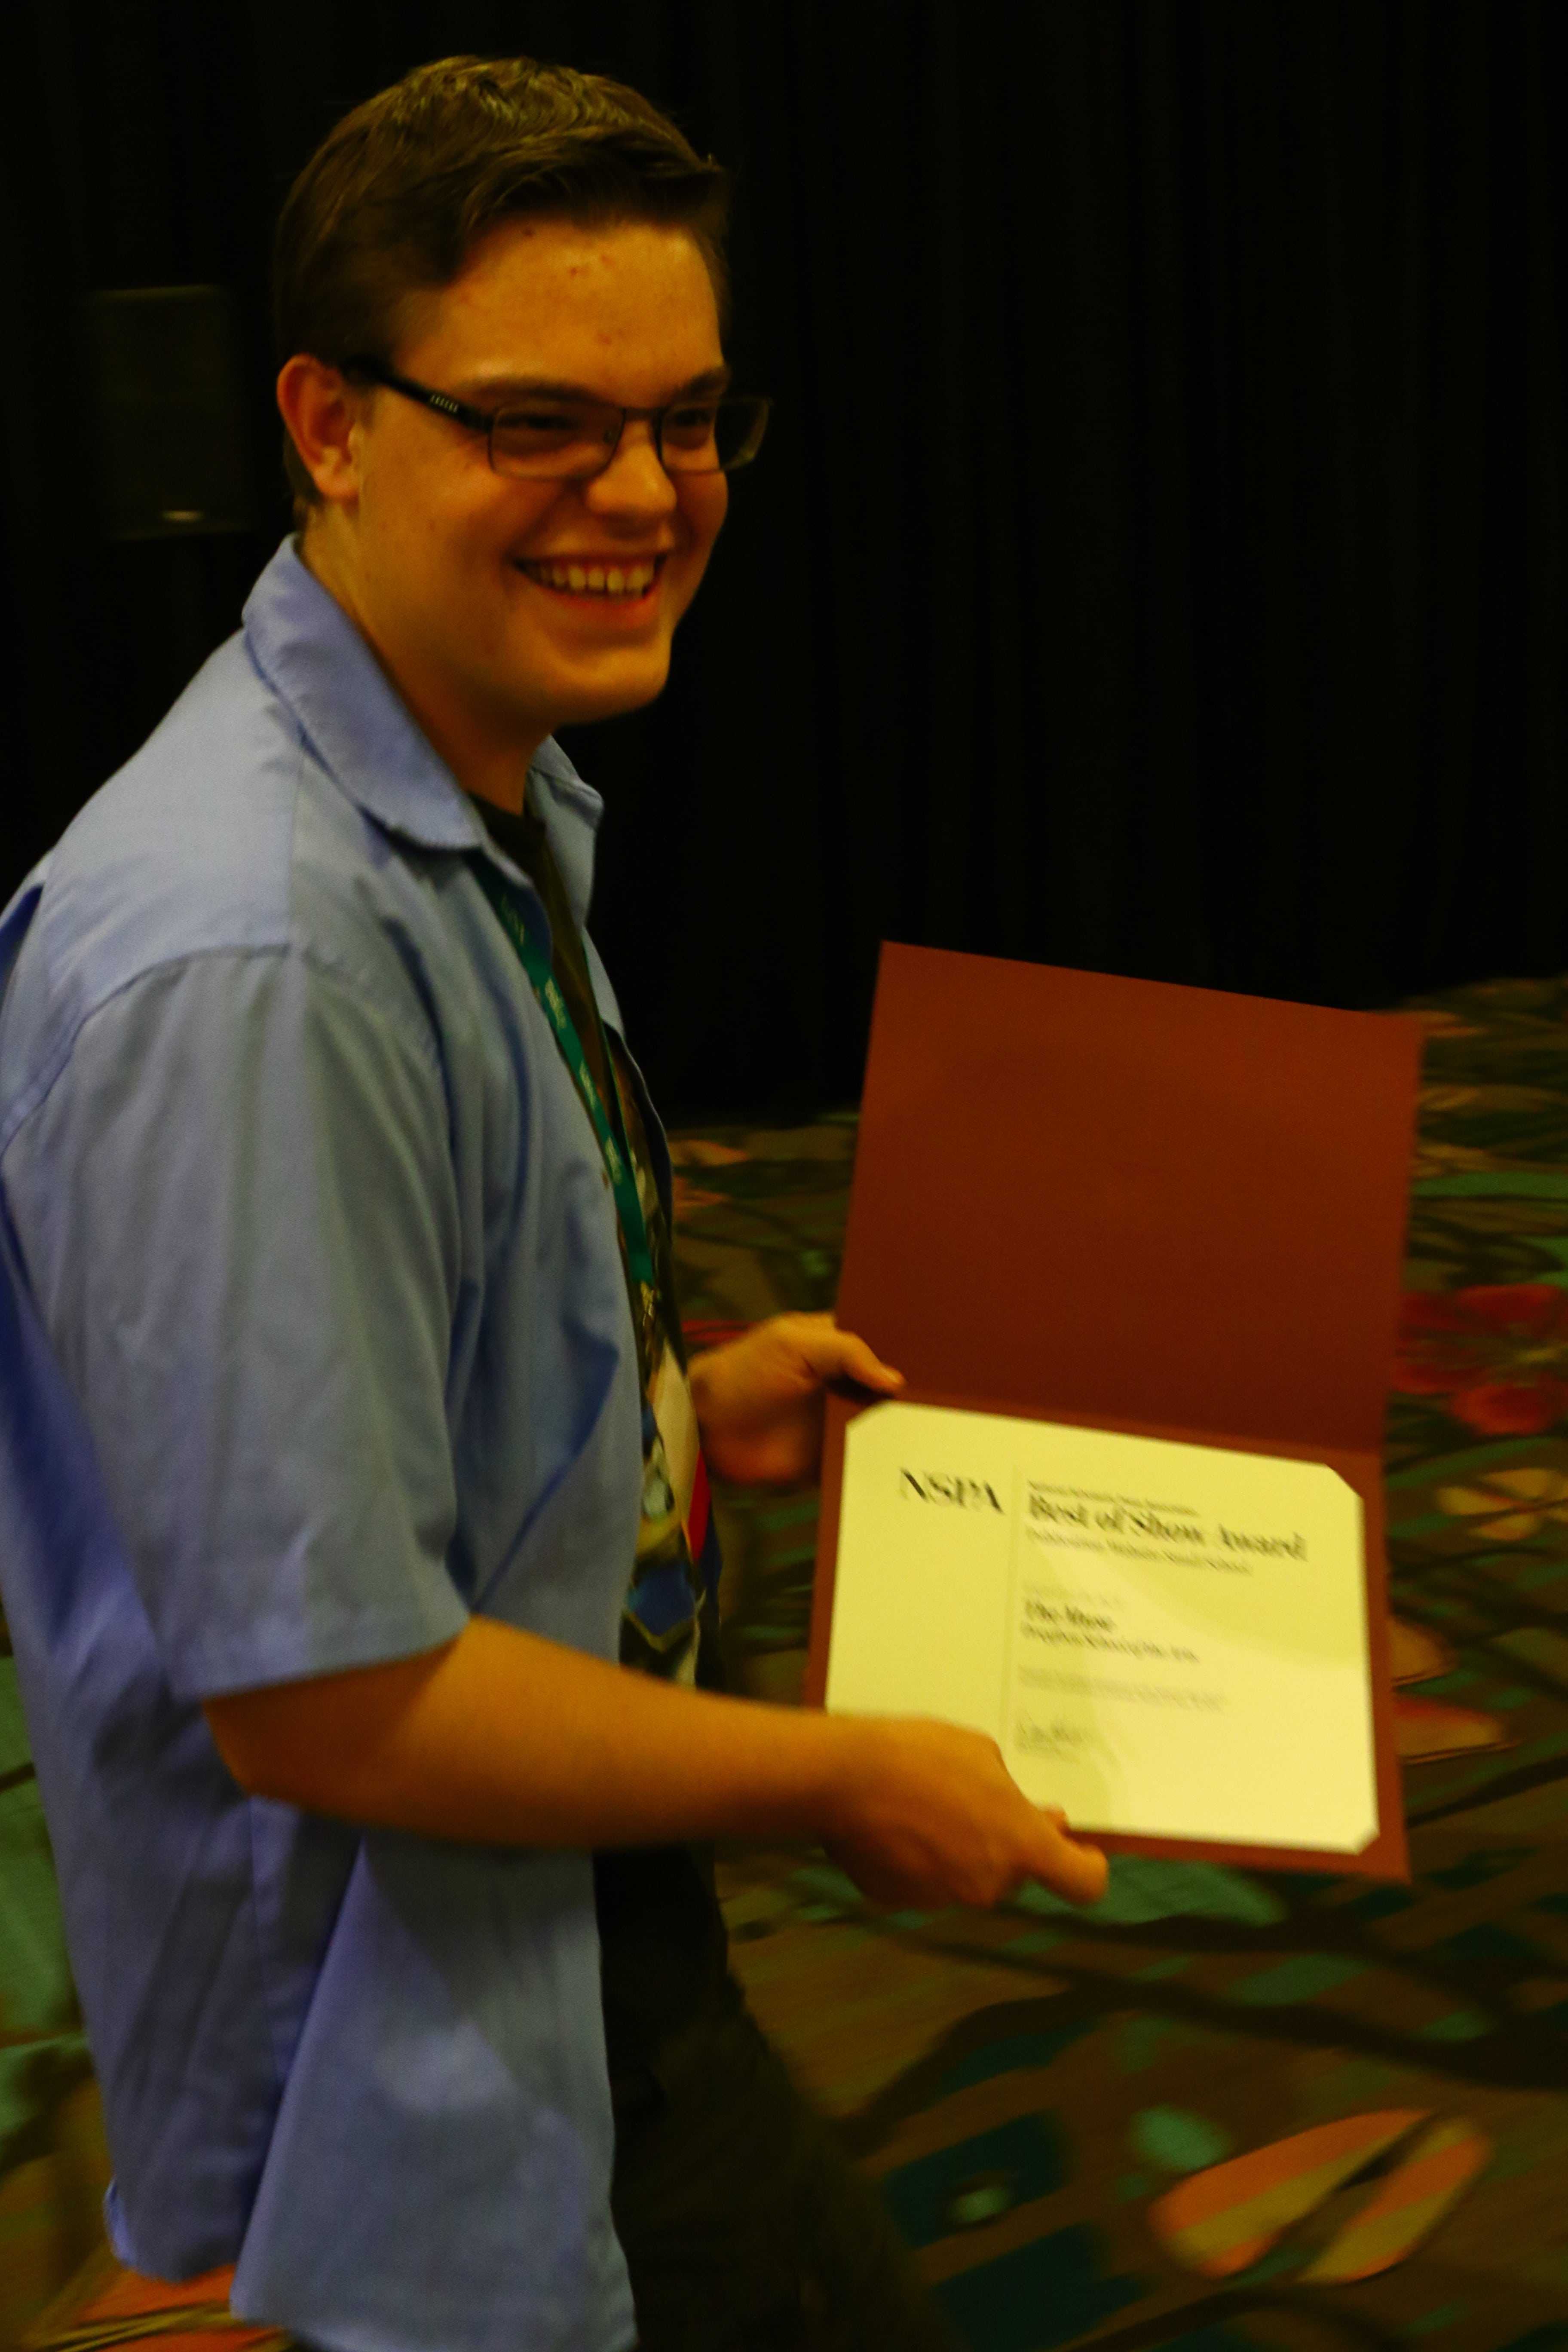 Students+attend+JEA%2FNSPA+journalism+convention%2C+receive+awards